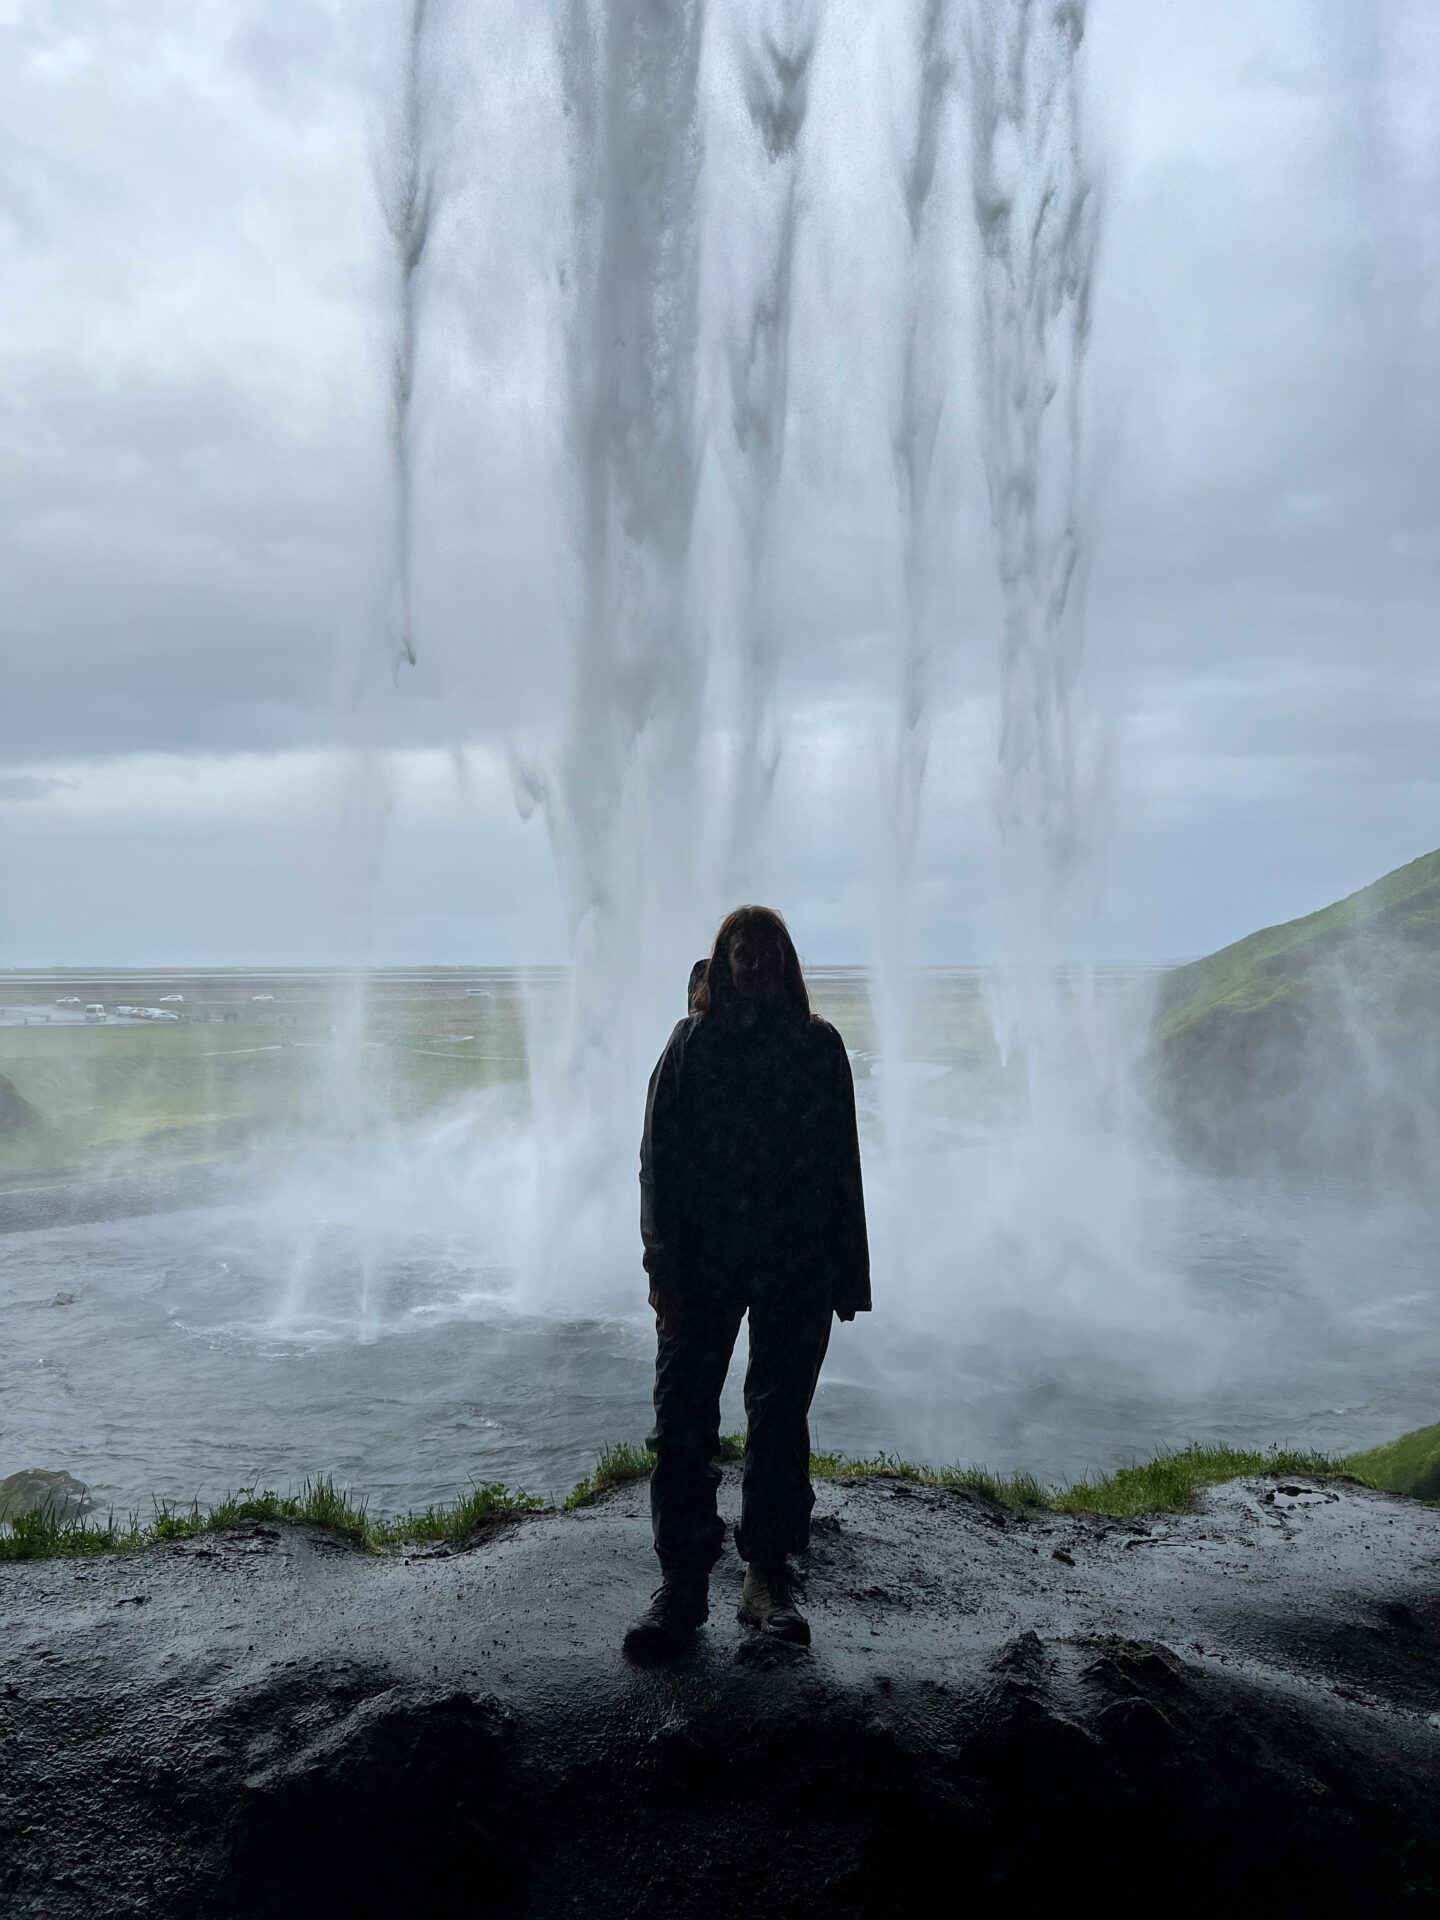 Visiting Seljalandsfoss is a must do on any Iceland itinerary 